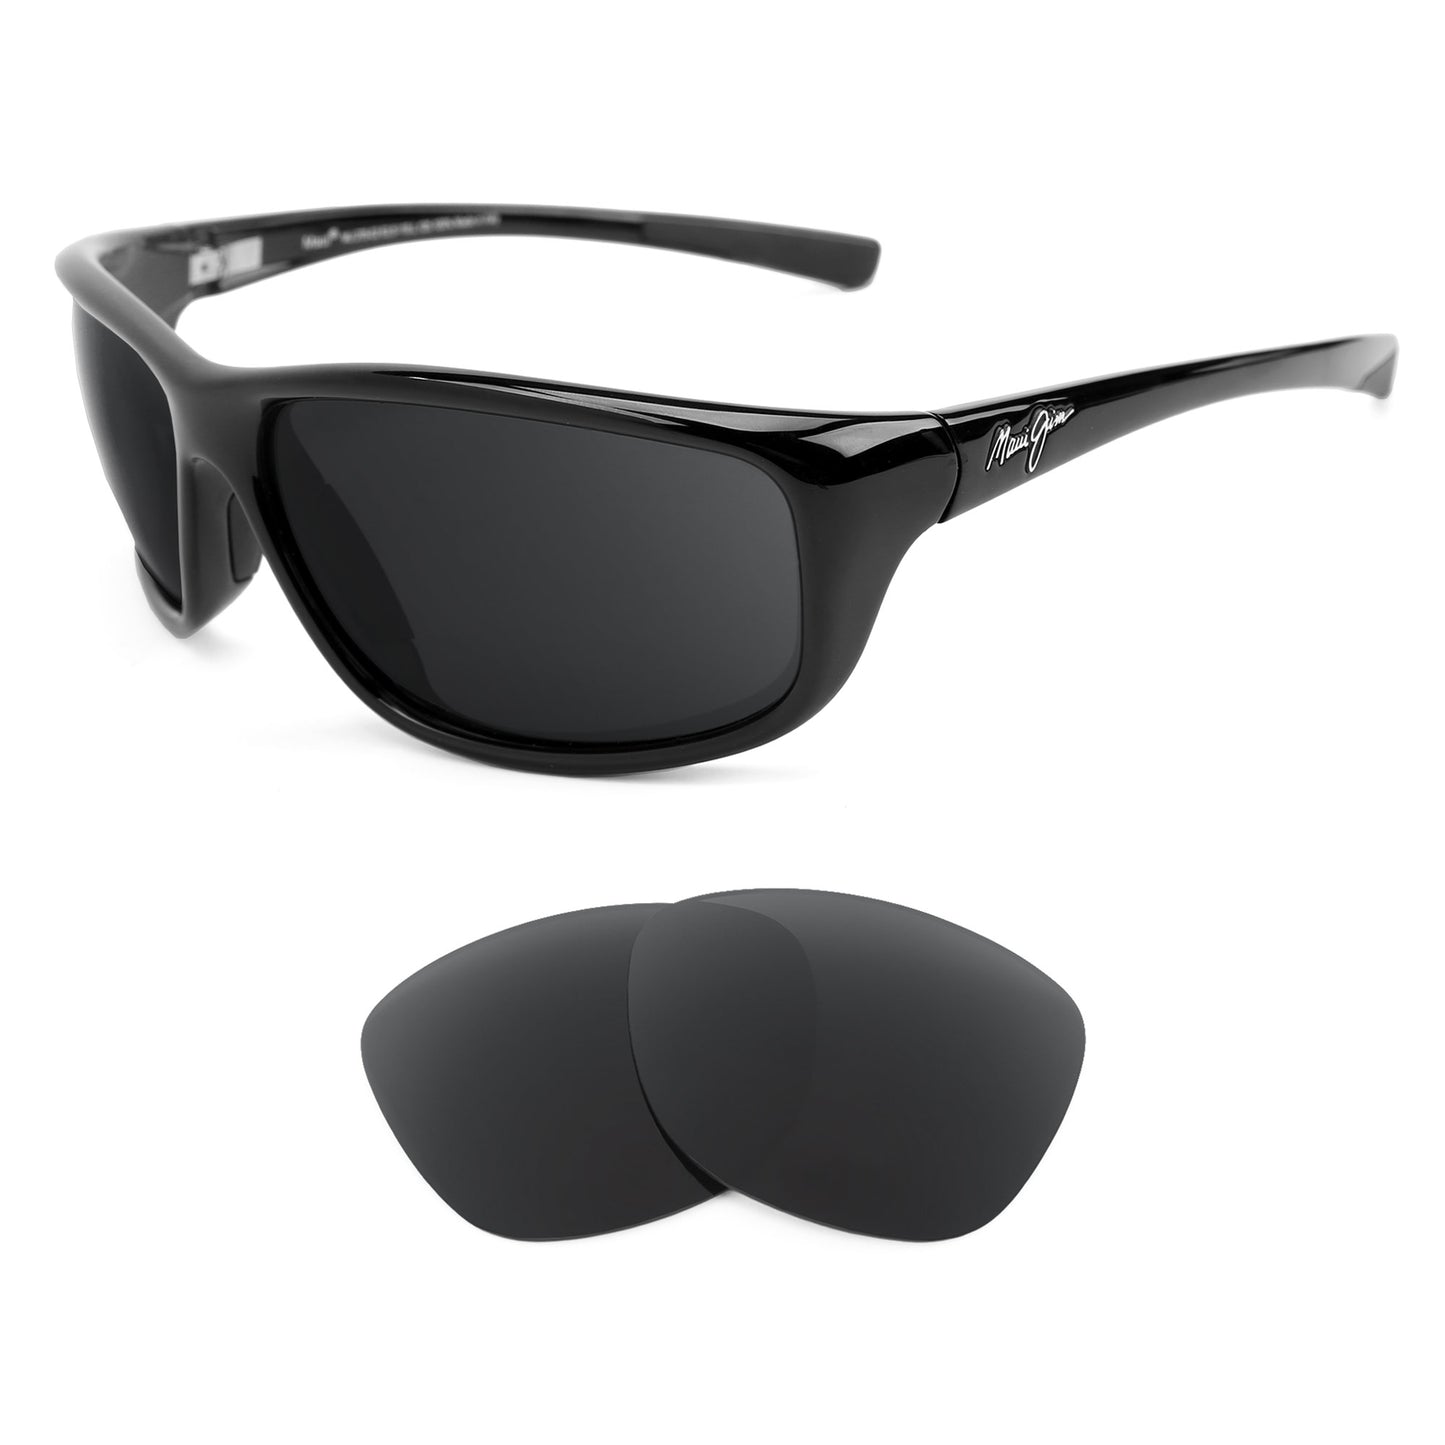 Maui Jim Spartan Reef MJ278 sunglasses with replacement lenses